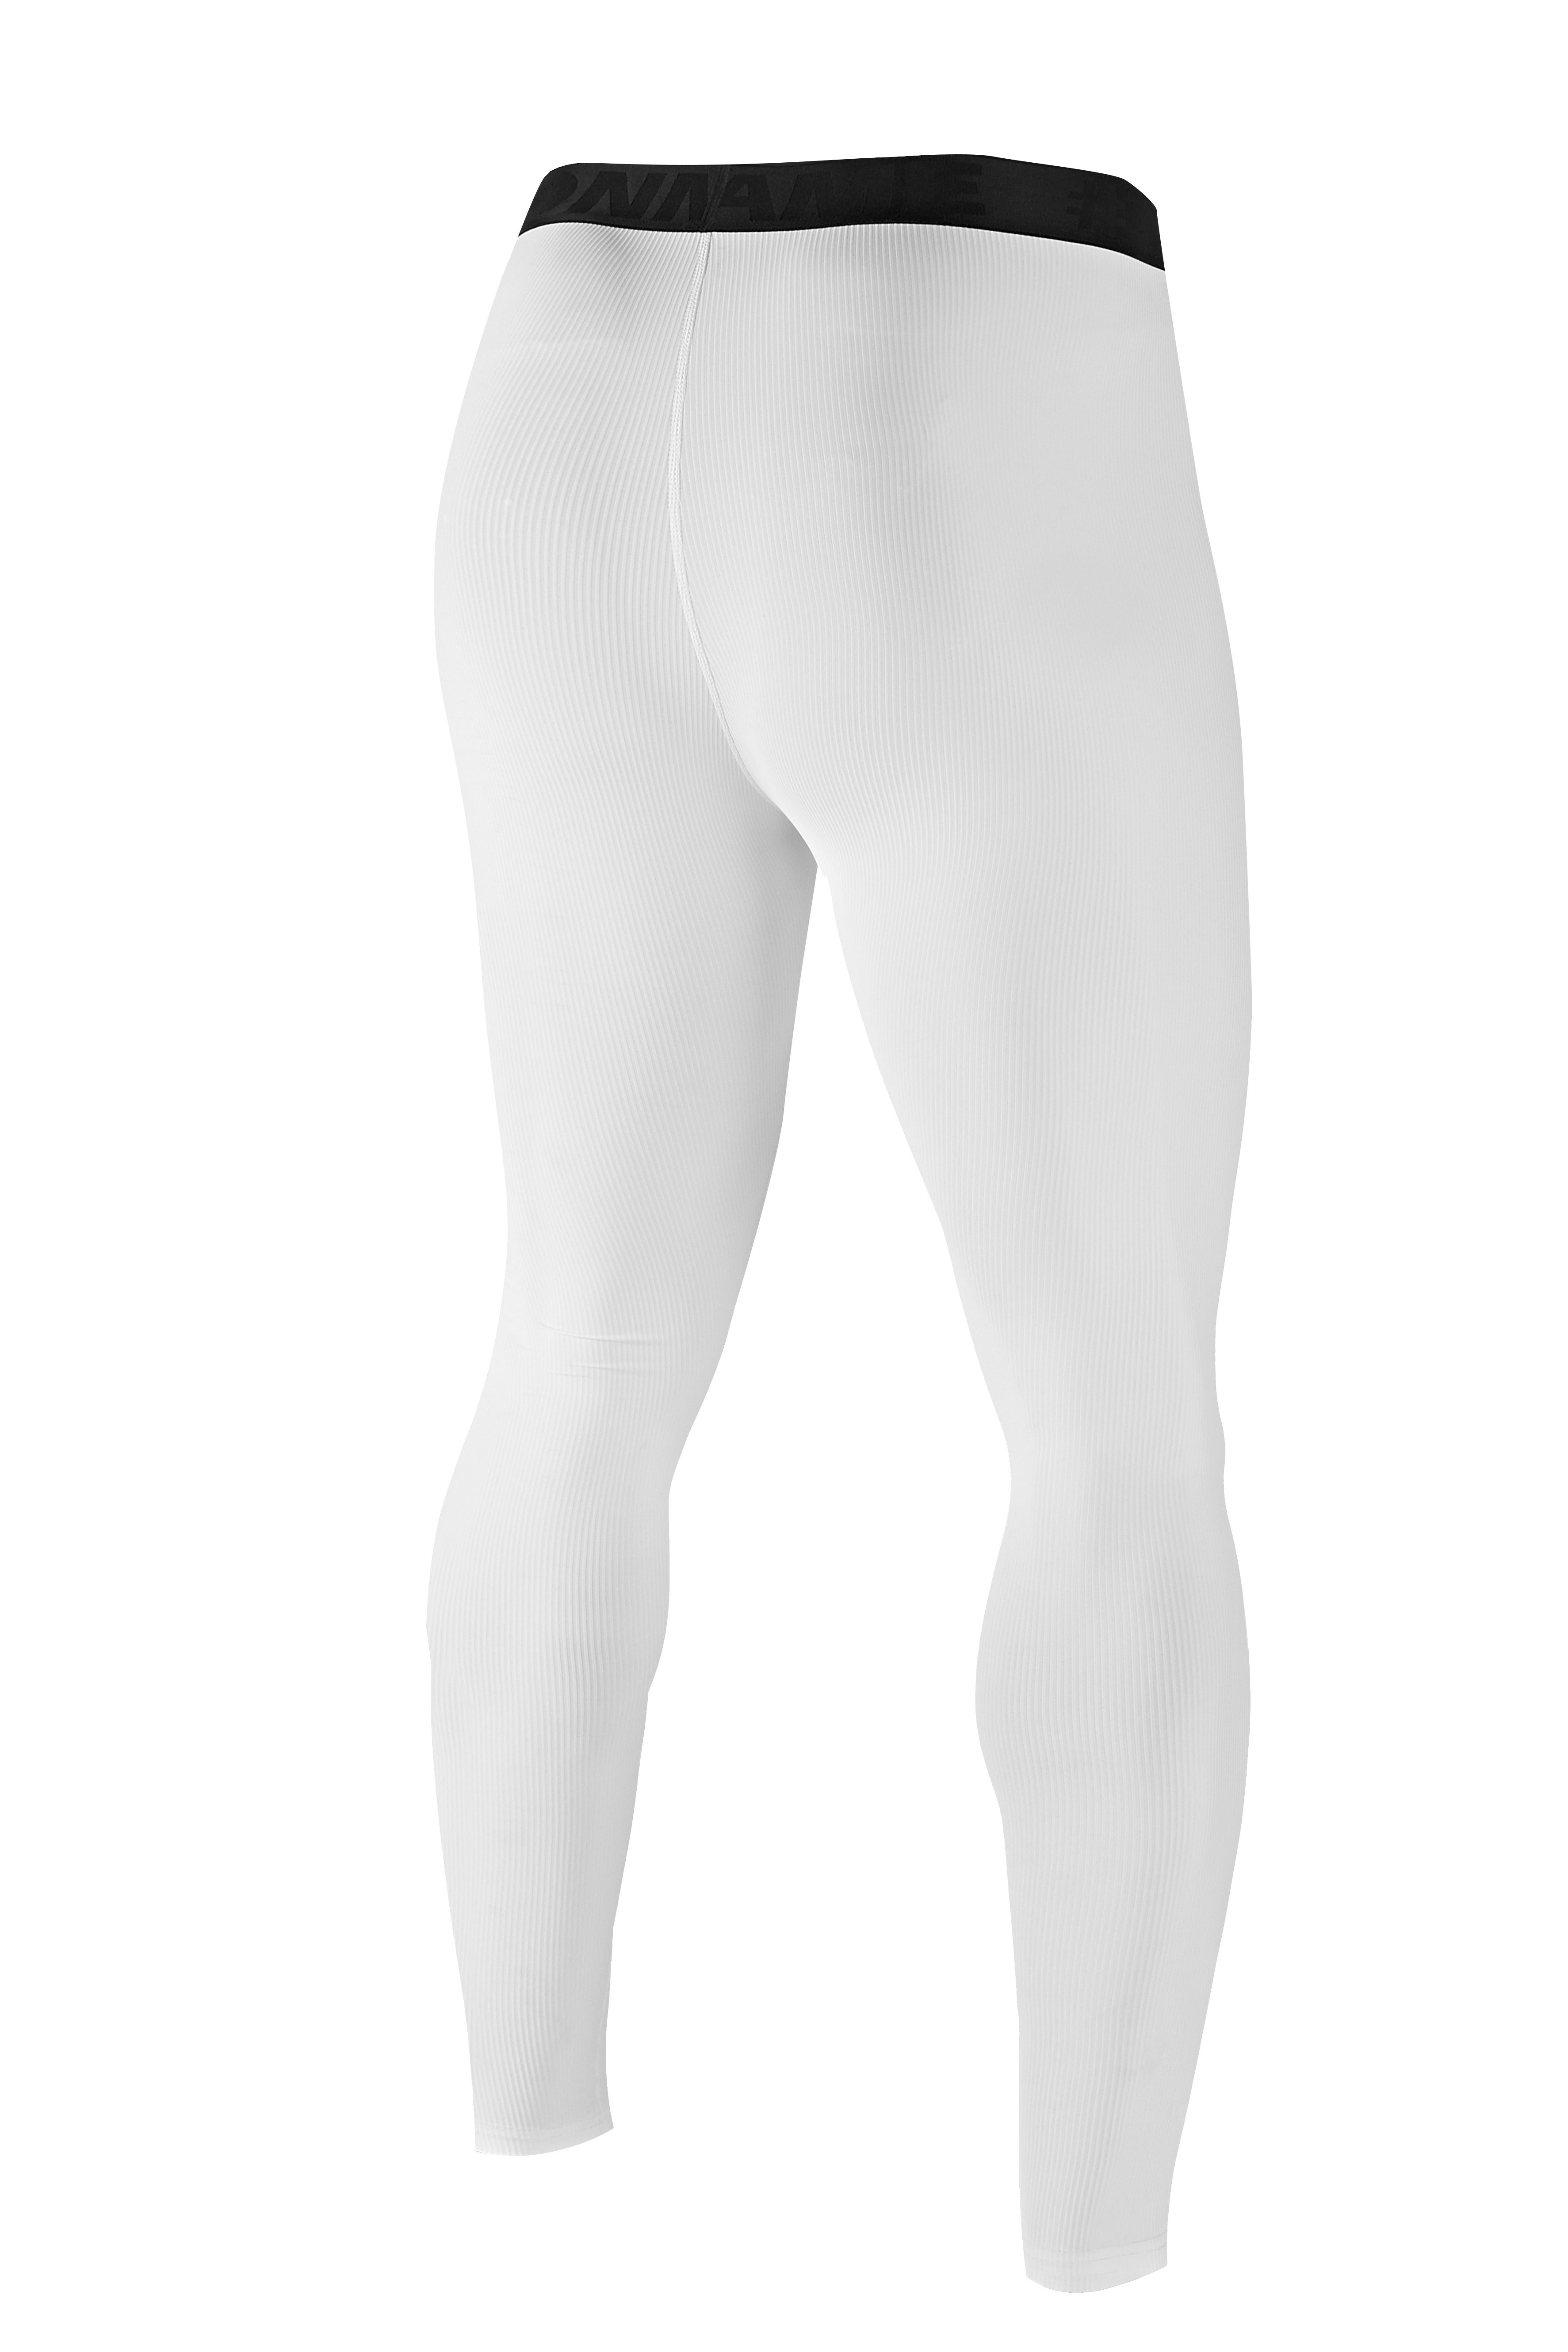 RNS FITNESS Solid Men White Tights - Buy RNS FITNESS Solid Men White Tights  Online at Best Prices in India